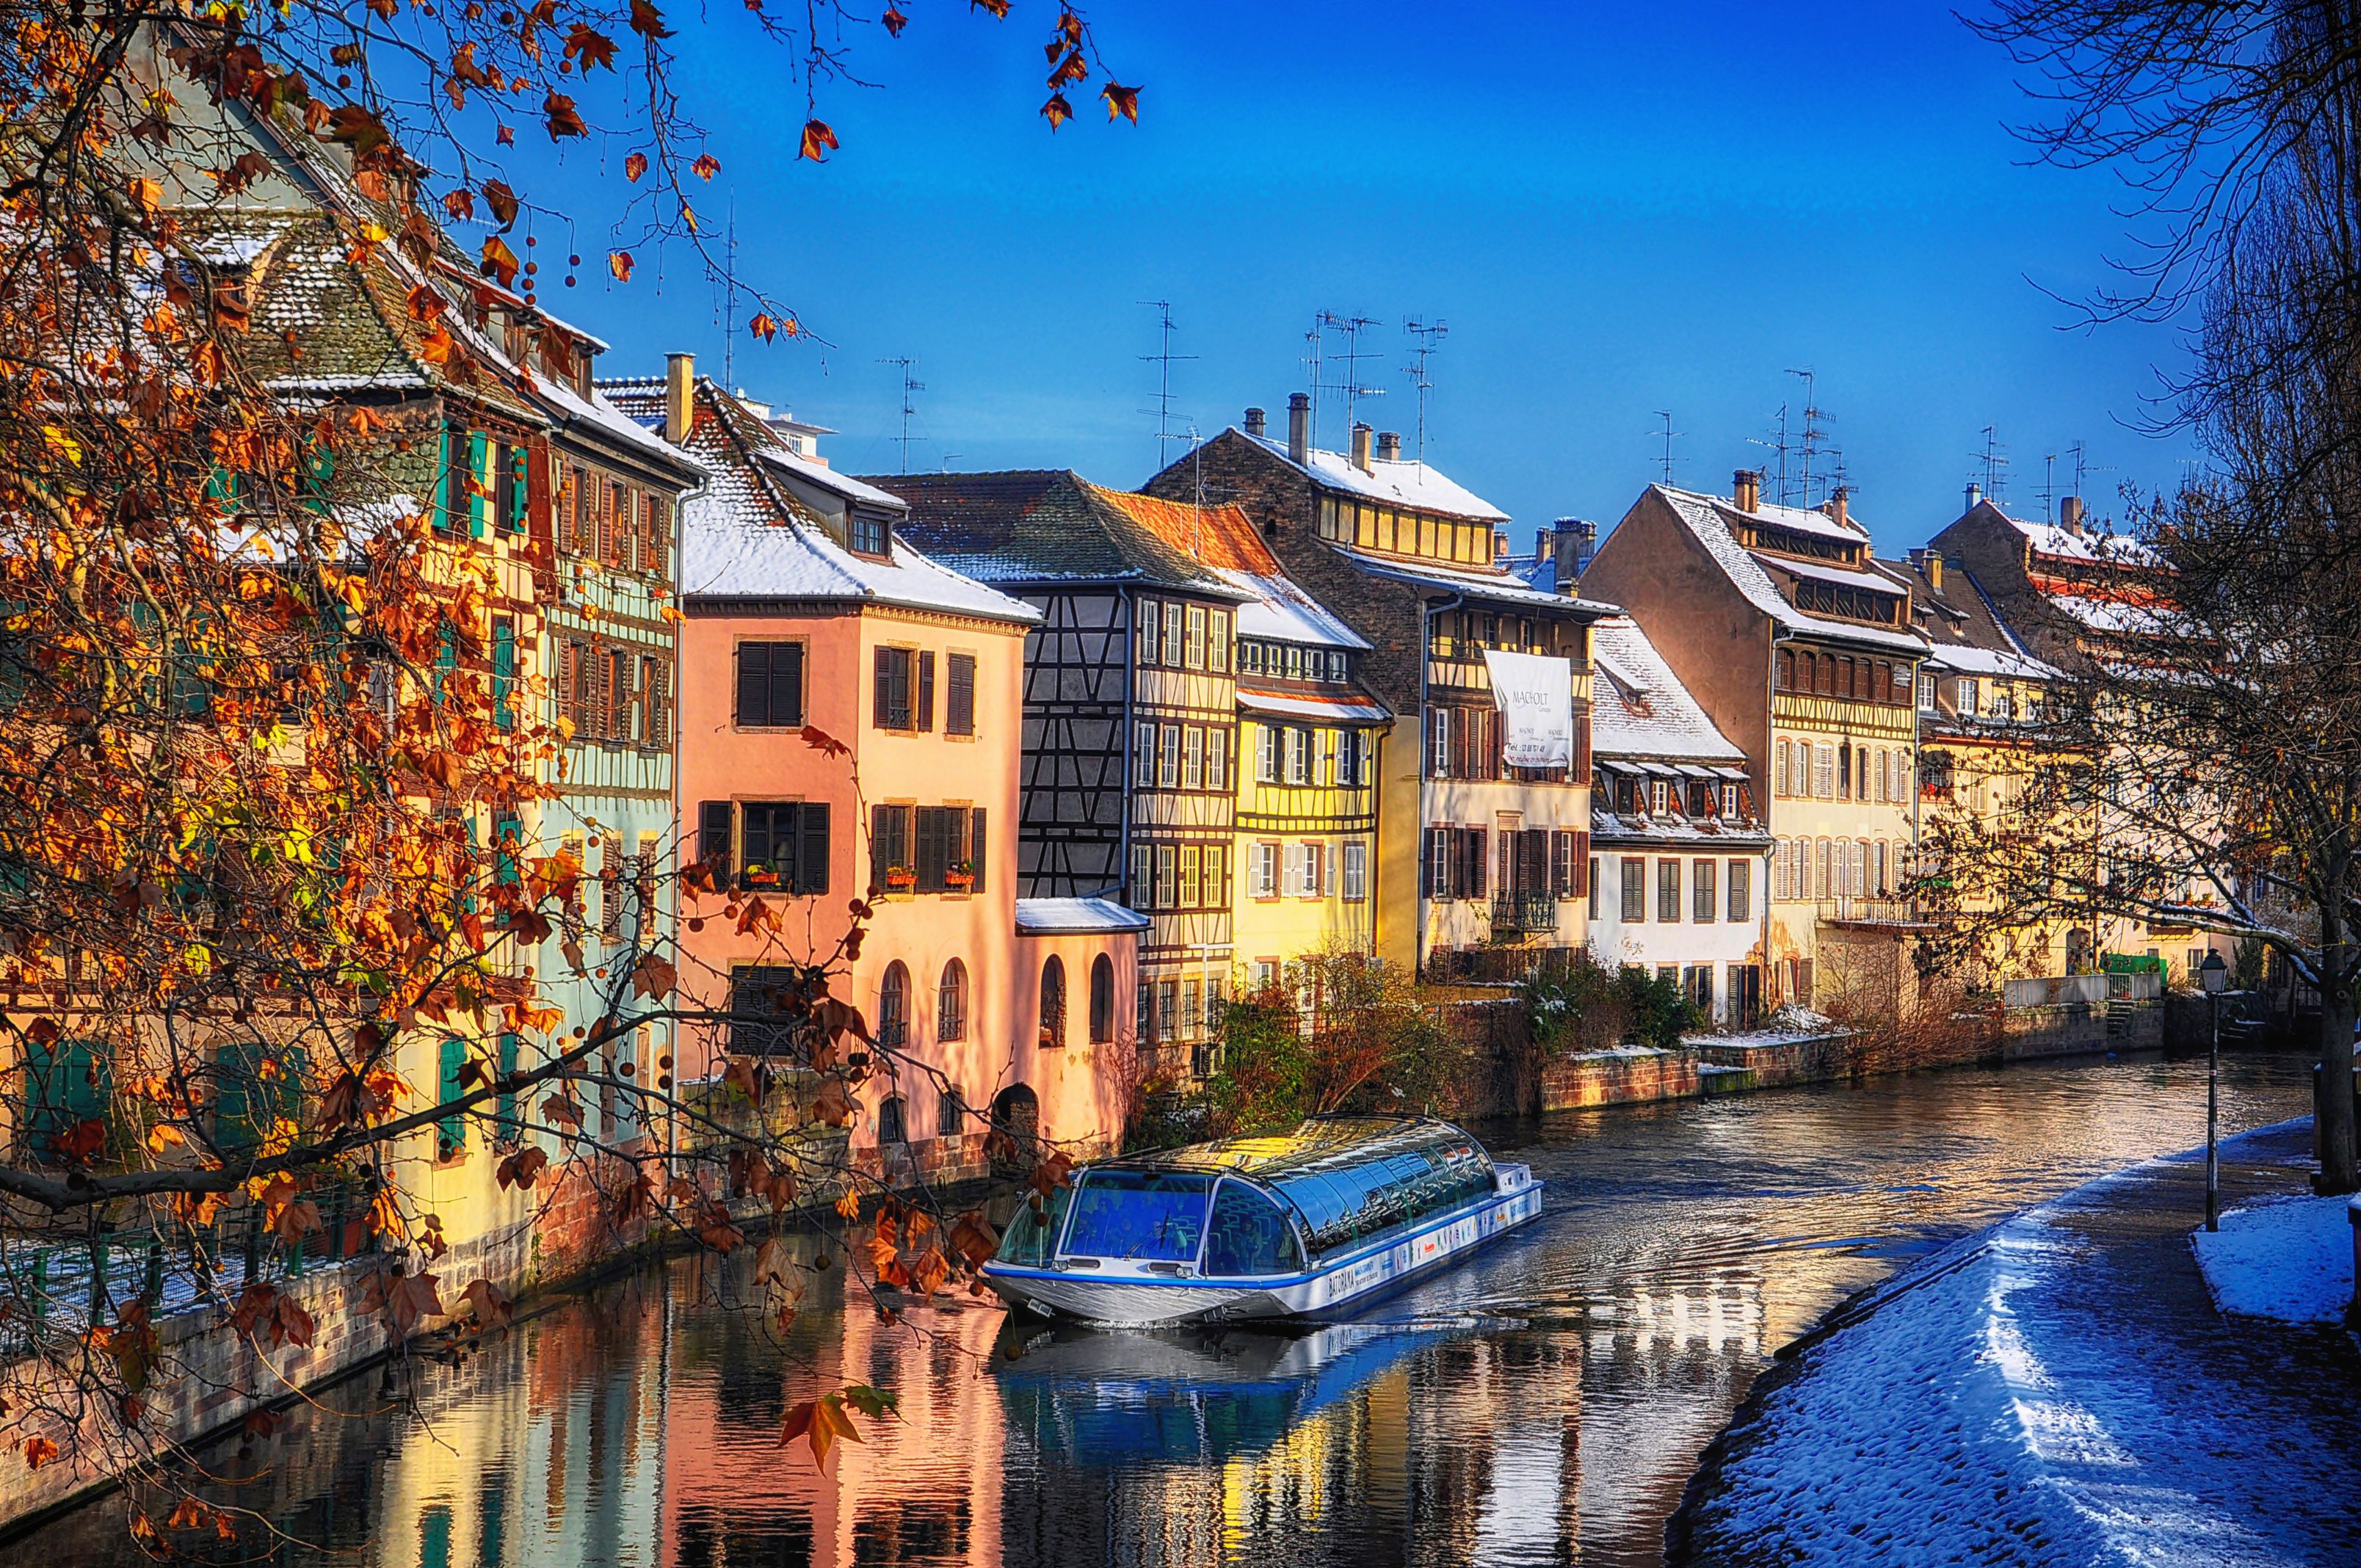 man made, strasbourg, city, france, house, river, cities